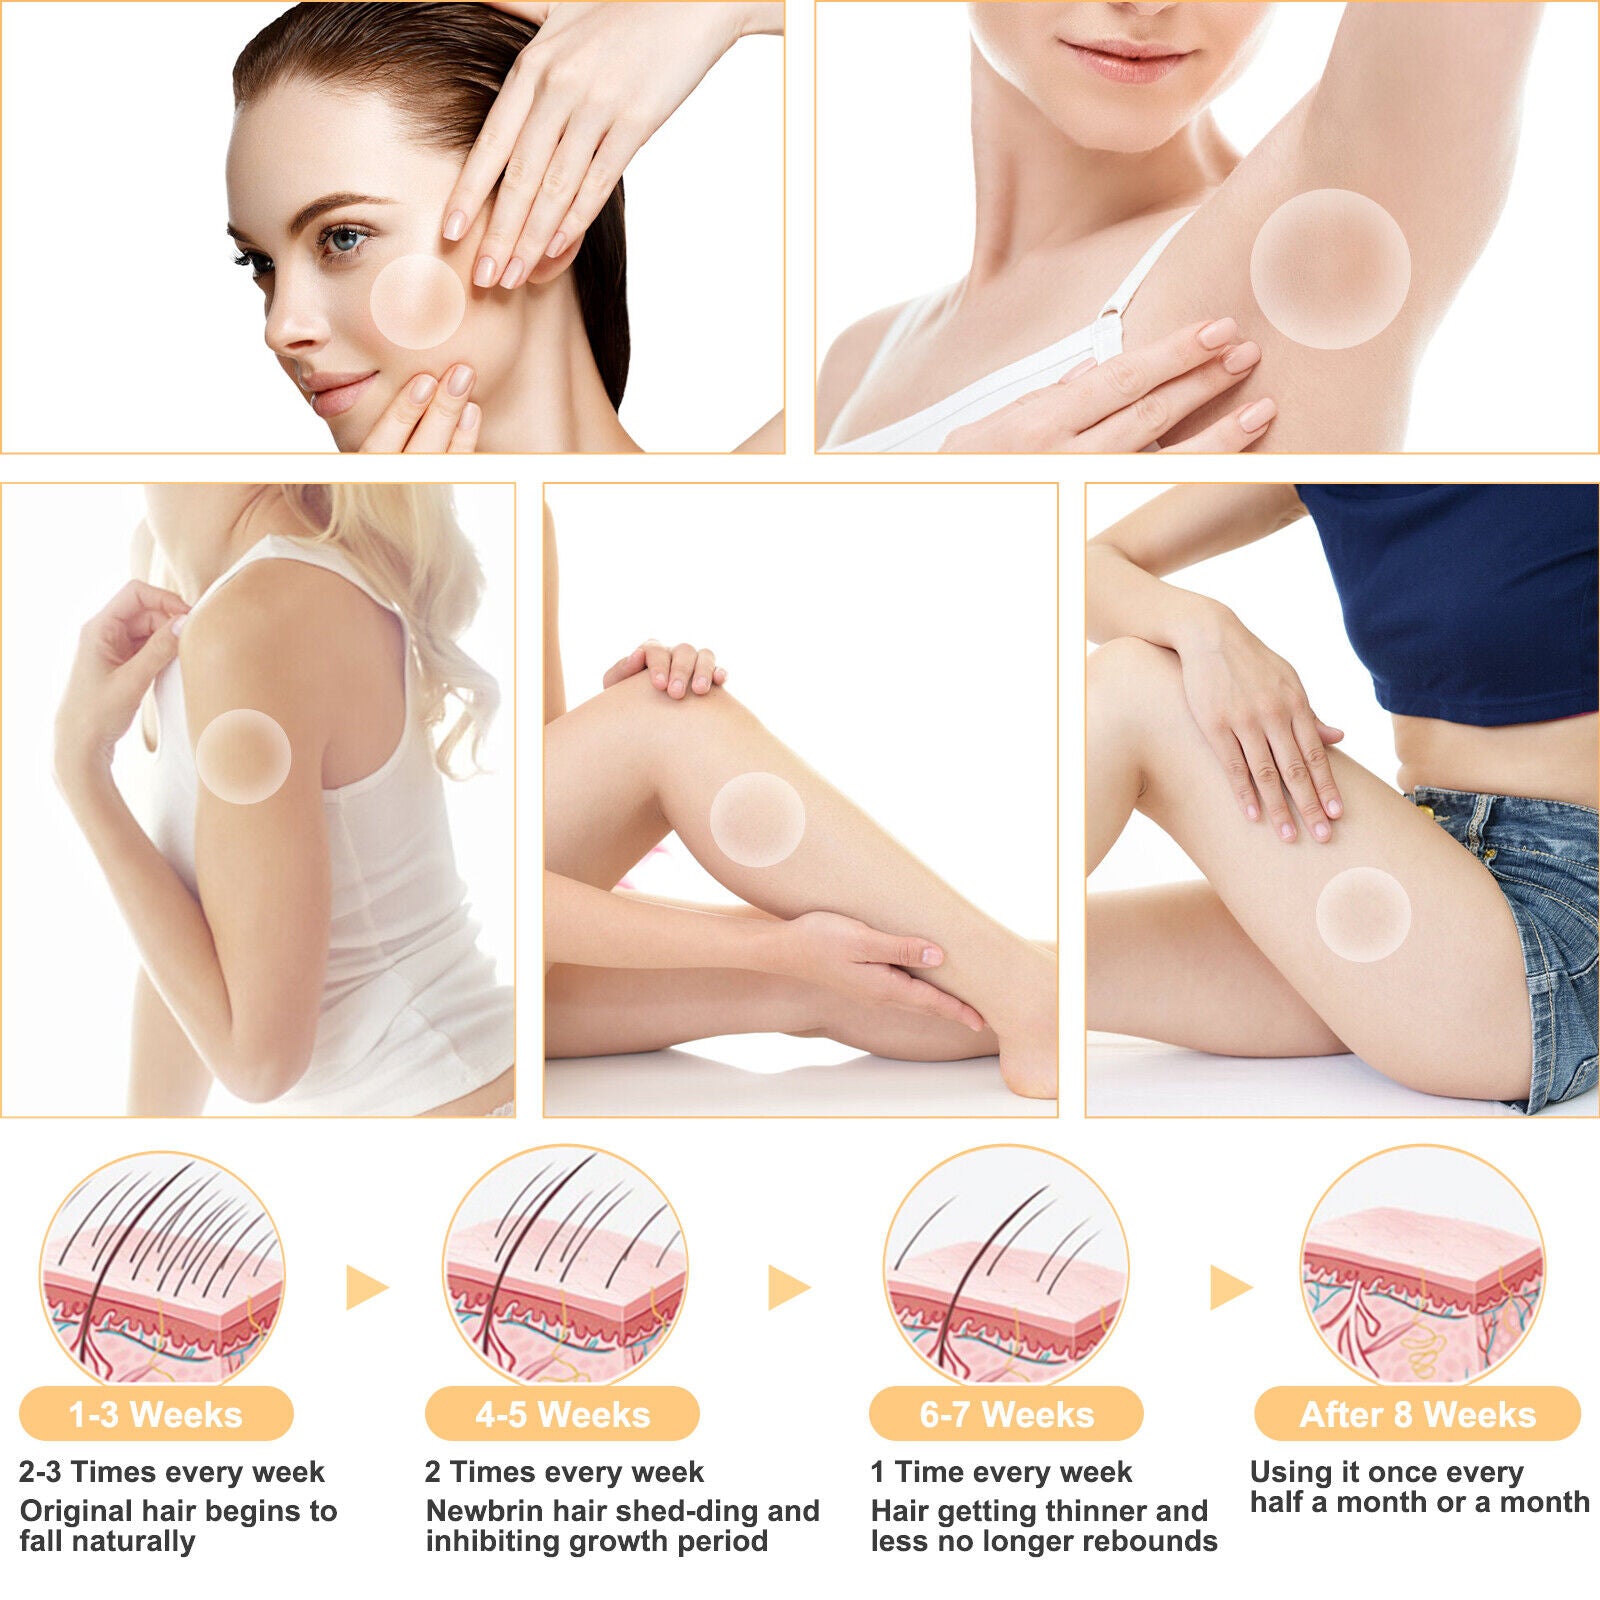 at-home laser treatment